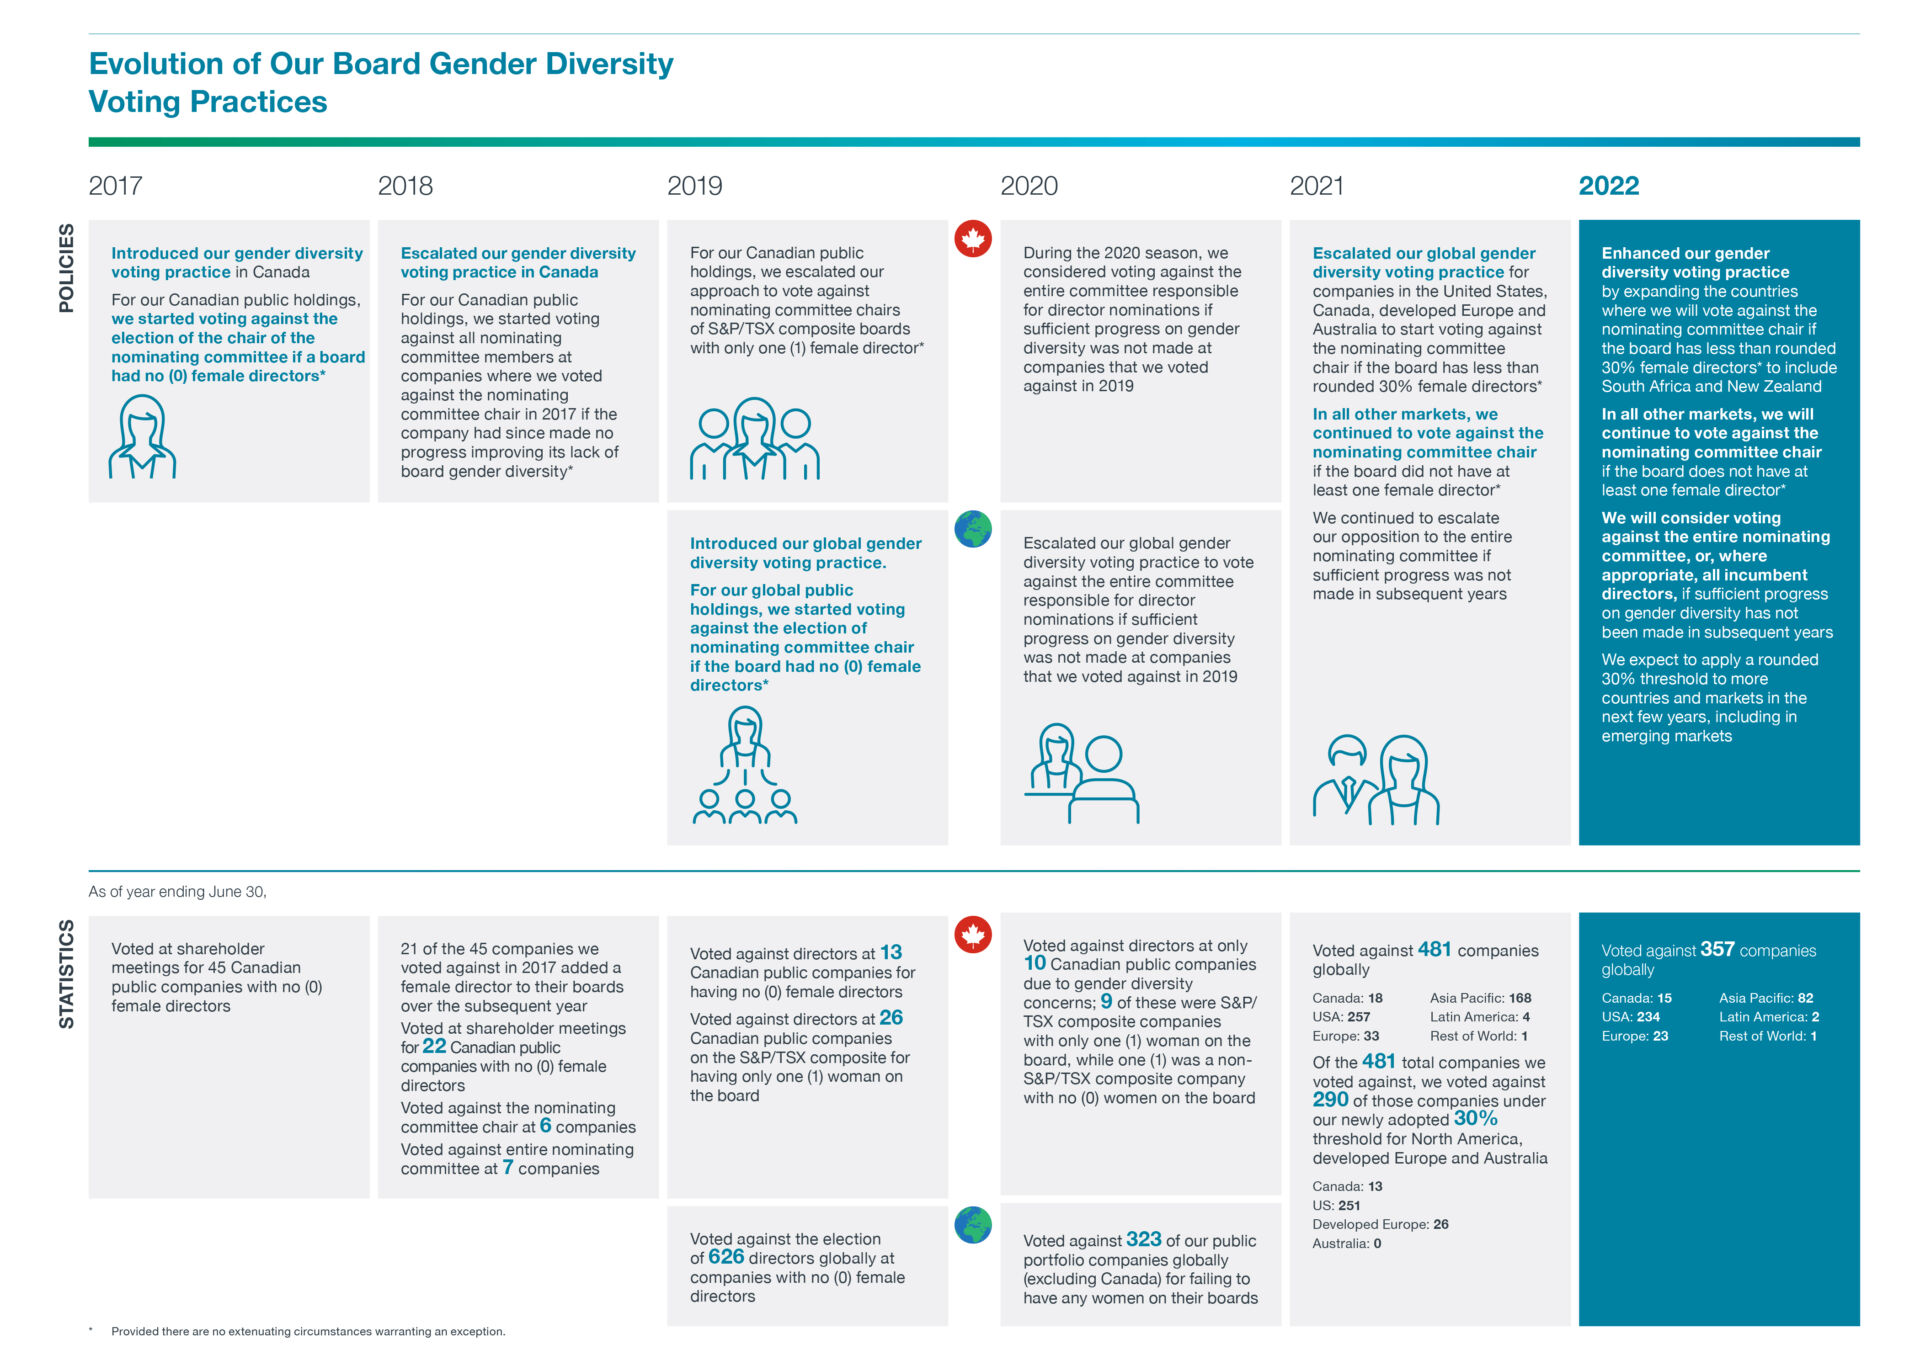 Evolution of Our Gender Diversity Voting Policy